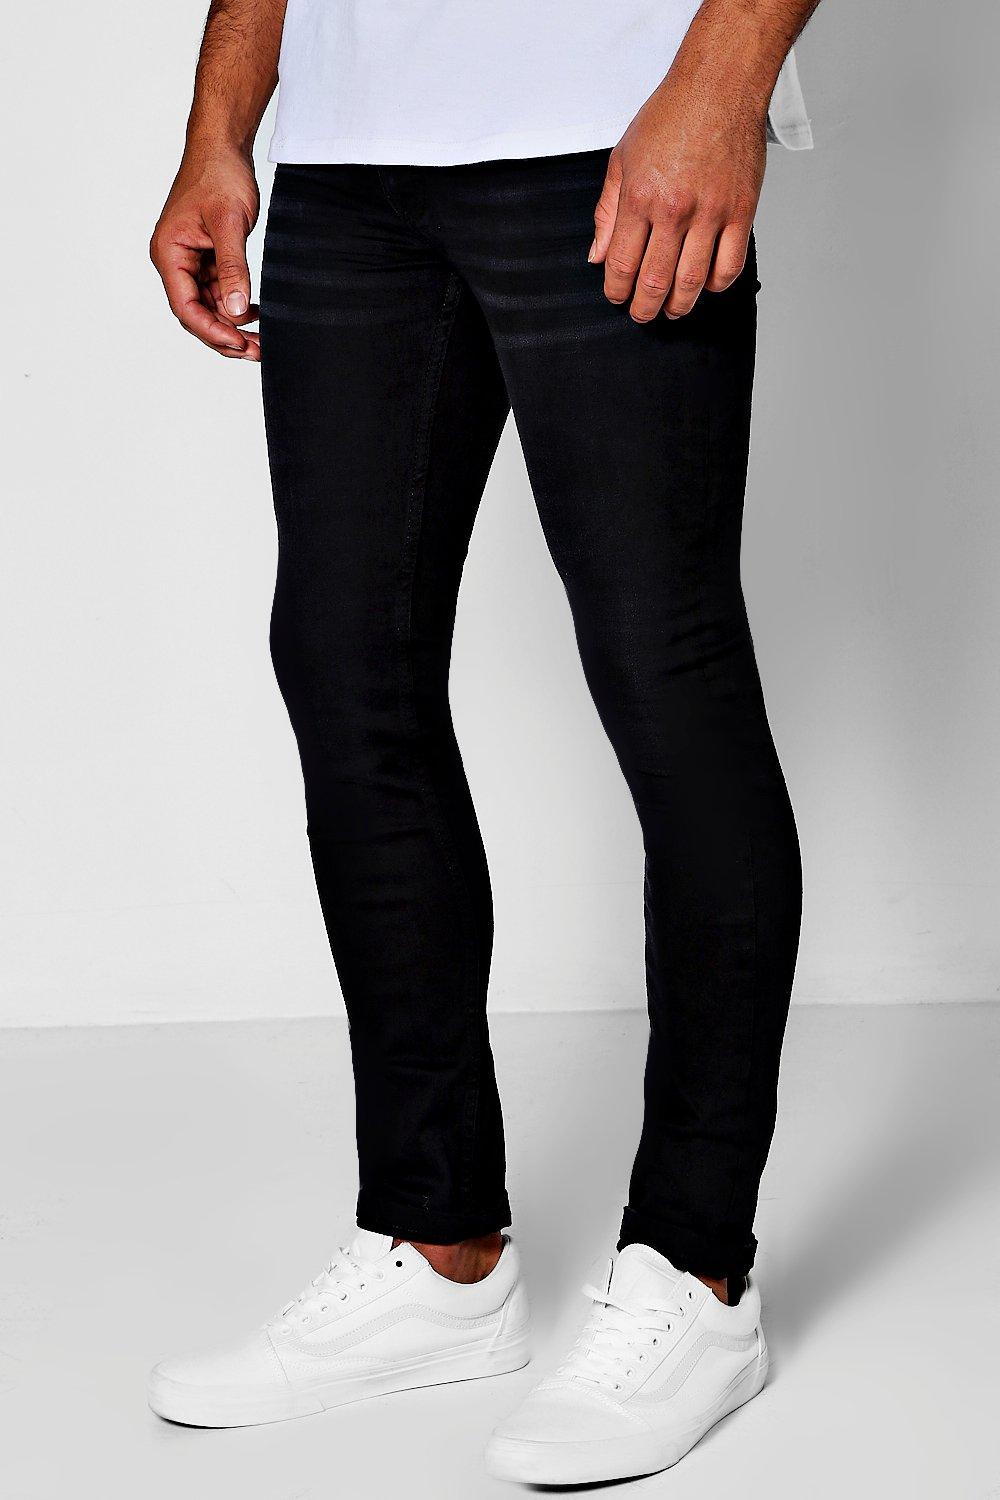 charcoal wash jeans